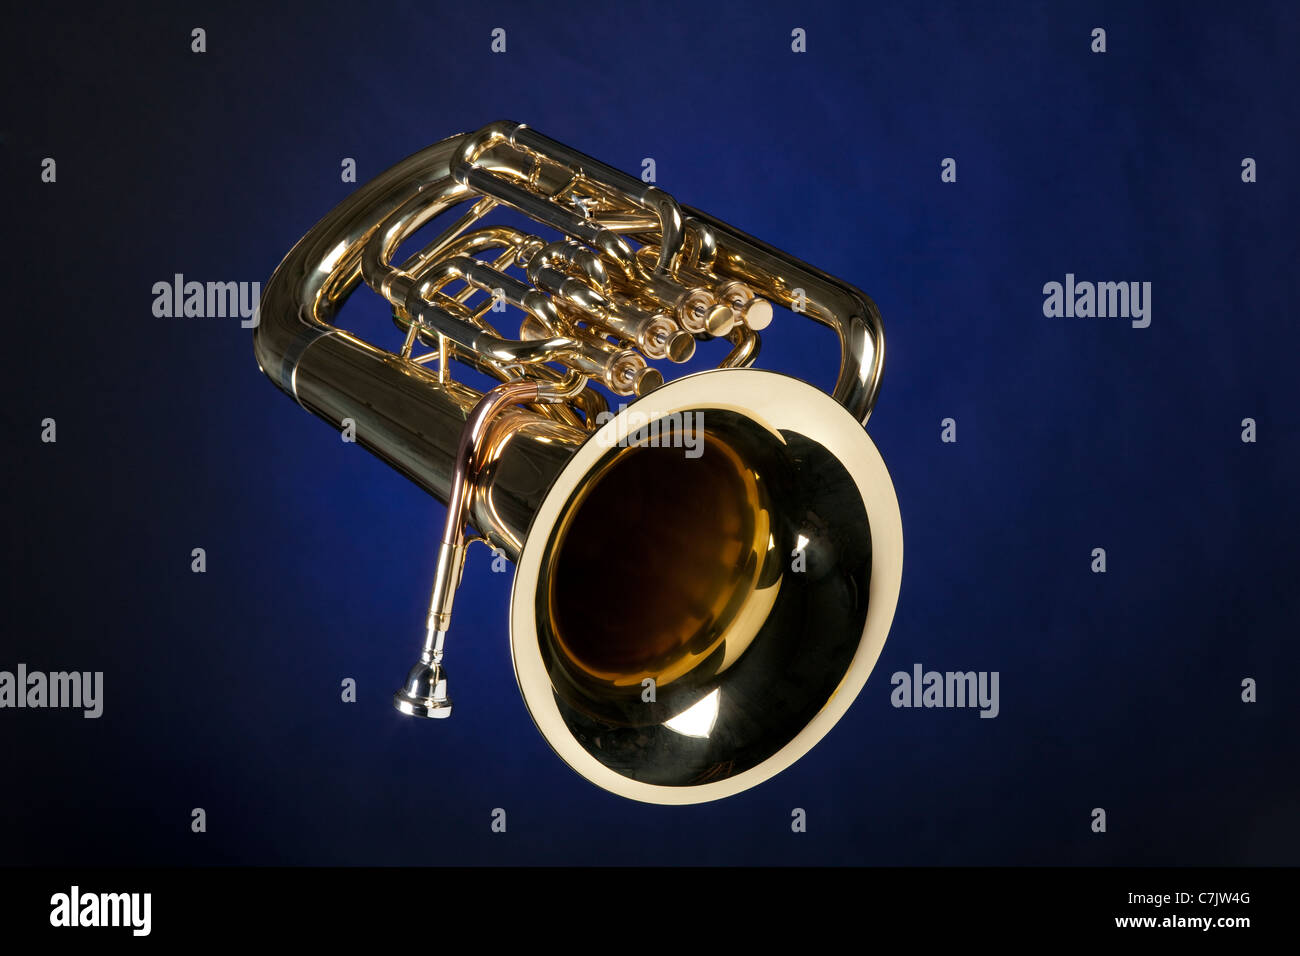 A gold brass euphonium tuba baritone horn isolated against a blue background. Stock Photo